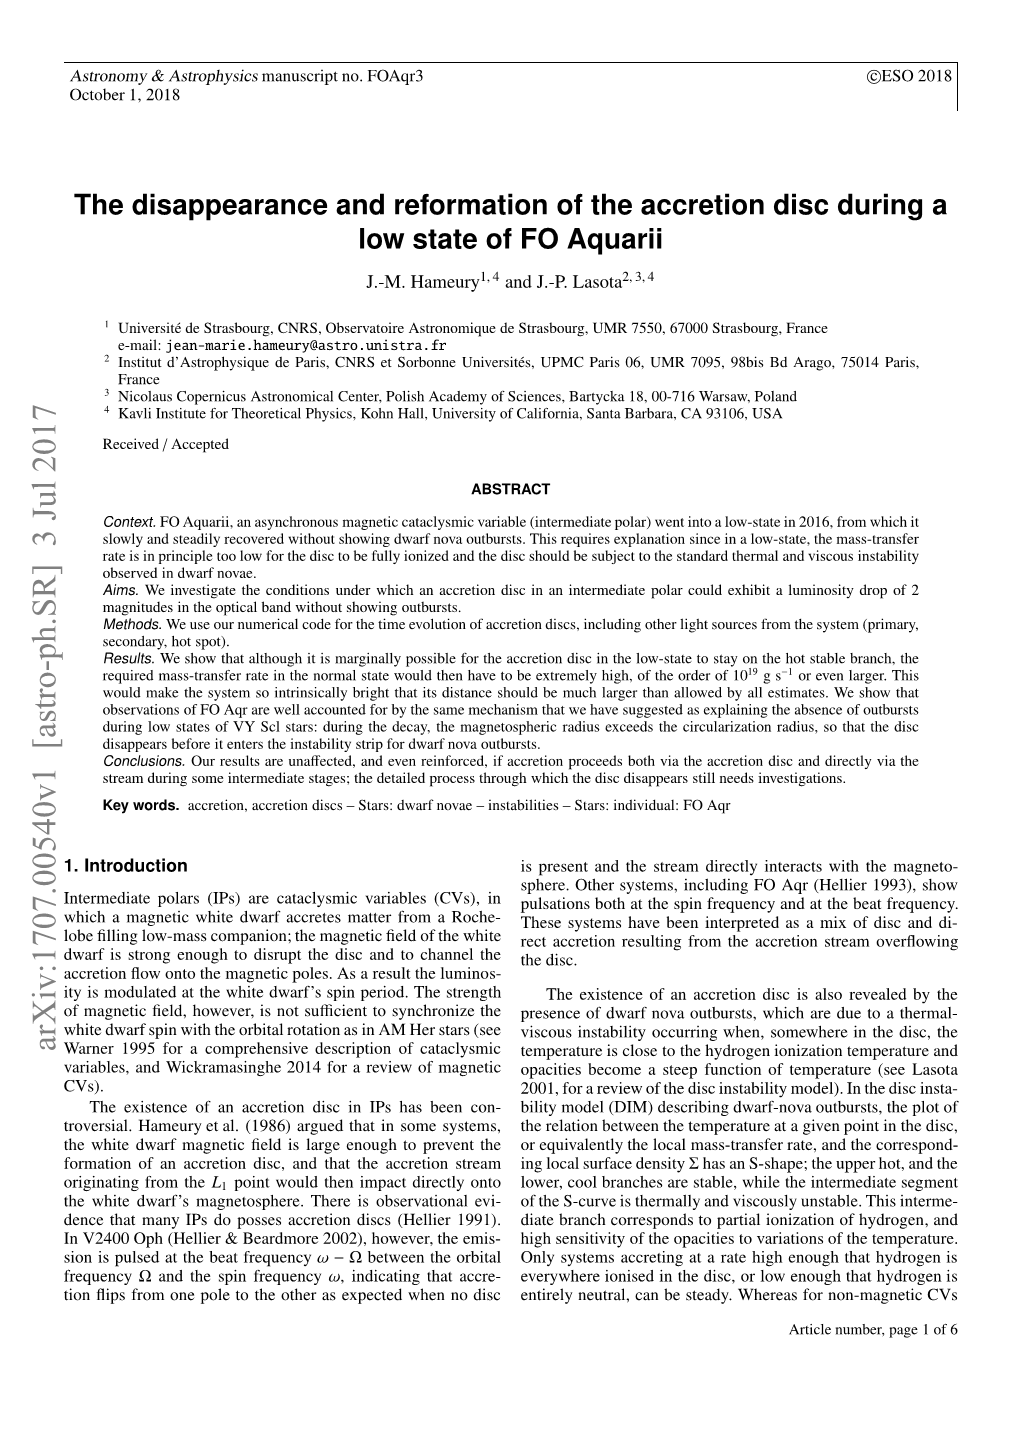 The Disappearance and Reformation of the Accretion Disc During a Low State of FO Aquarii